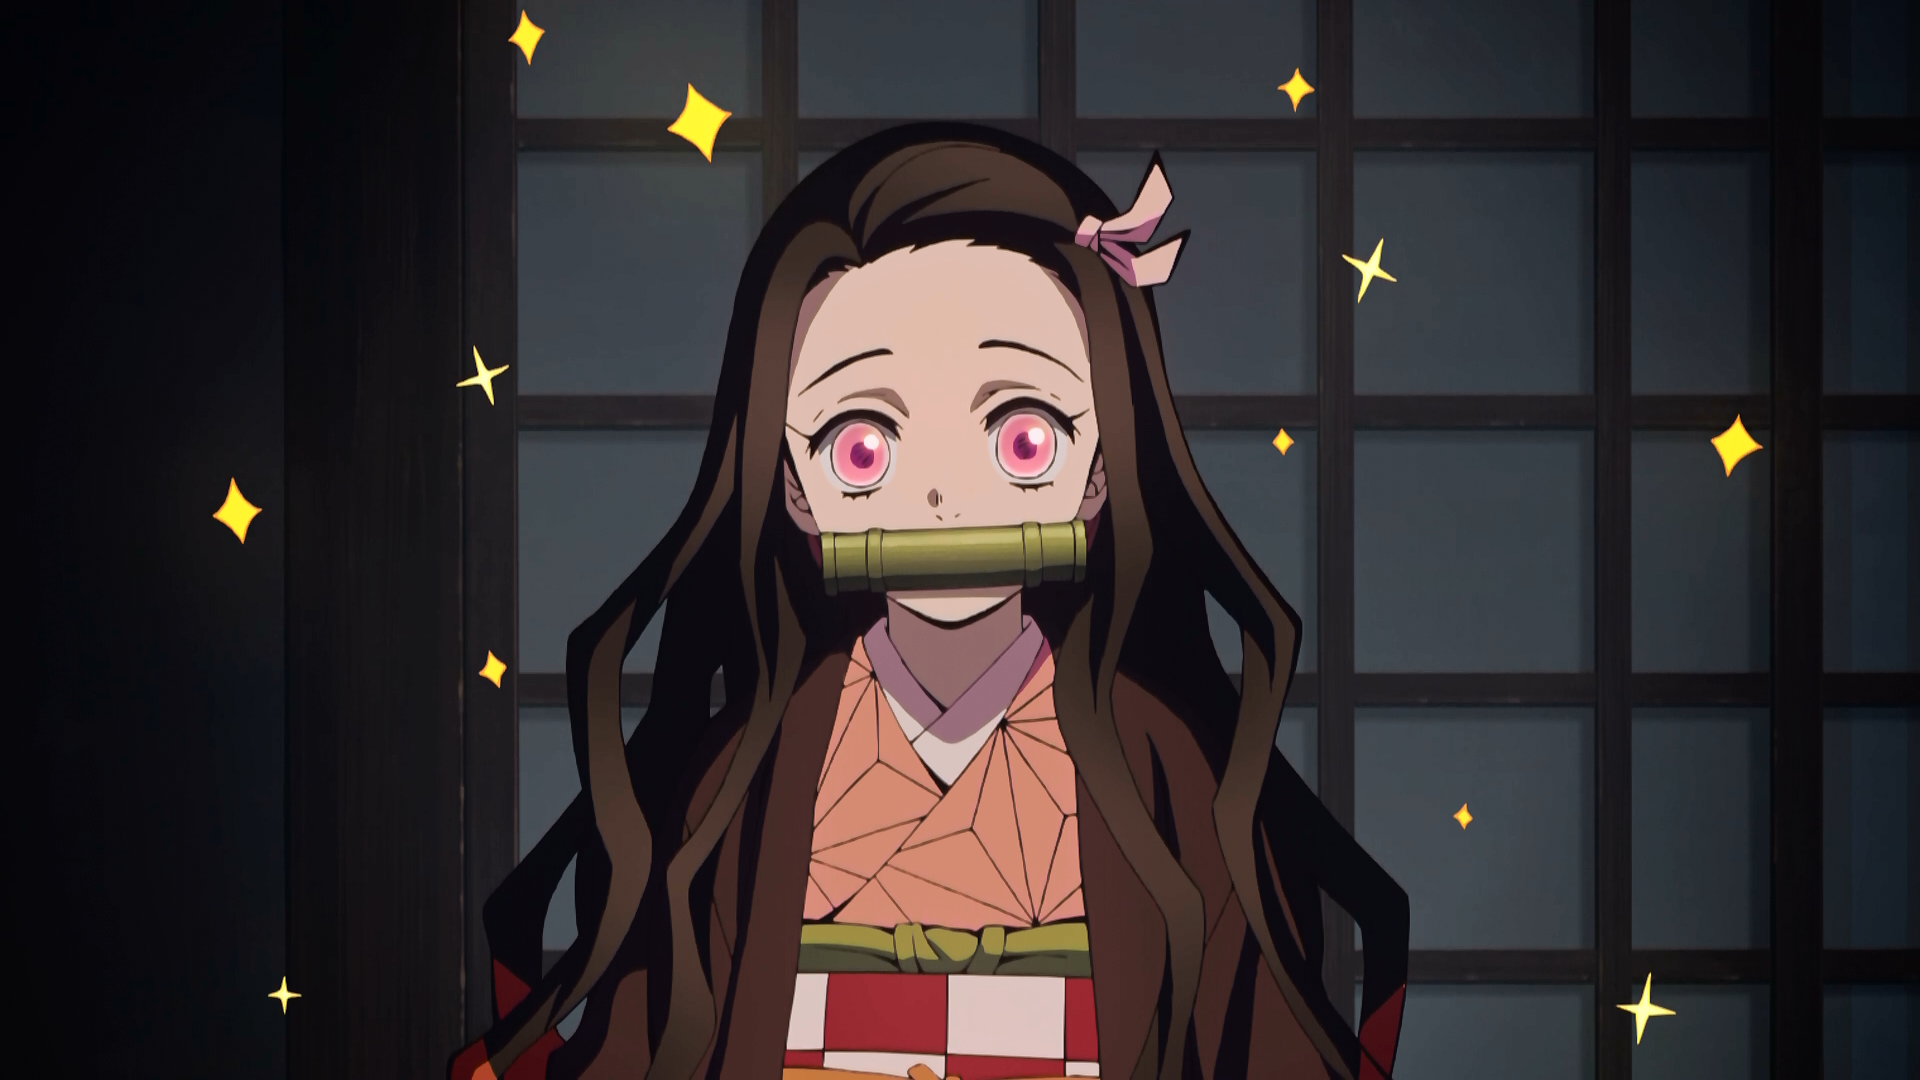 Demon Slayer: Kimetsu no Yaiba - Stay up late tonight with Demon Slayer:  Kimetsu no Yaiba Episode 14 The House with the Wisteria Family Crest on  Toonami tonight at 3:30 am!